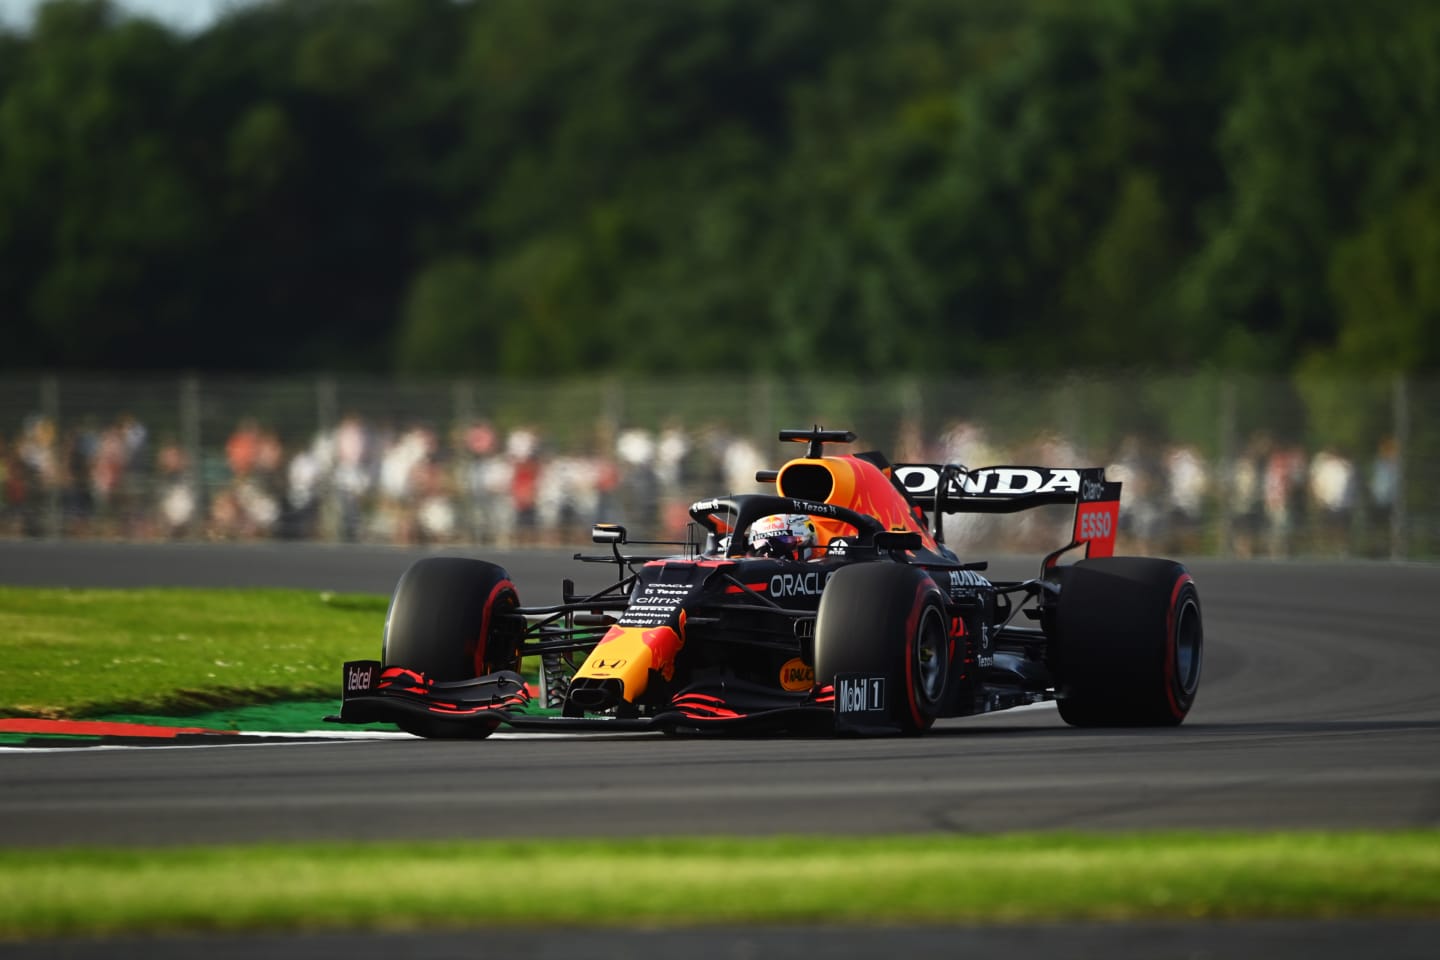 NORTHAMPTON, ENGLAND - JULY 16: Max Verstappen of the Netherlands driving the (33) Red Bull Racing